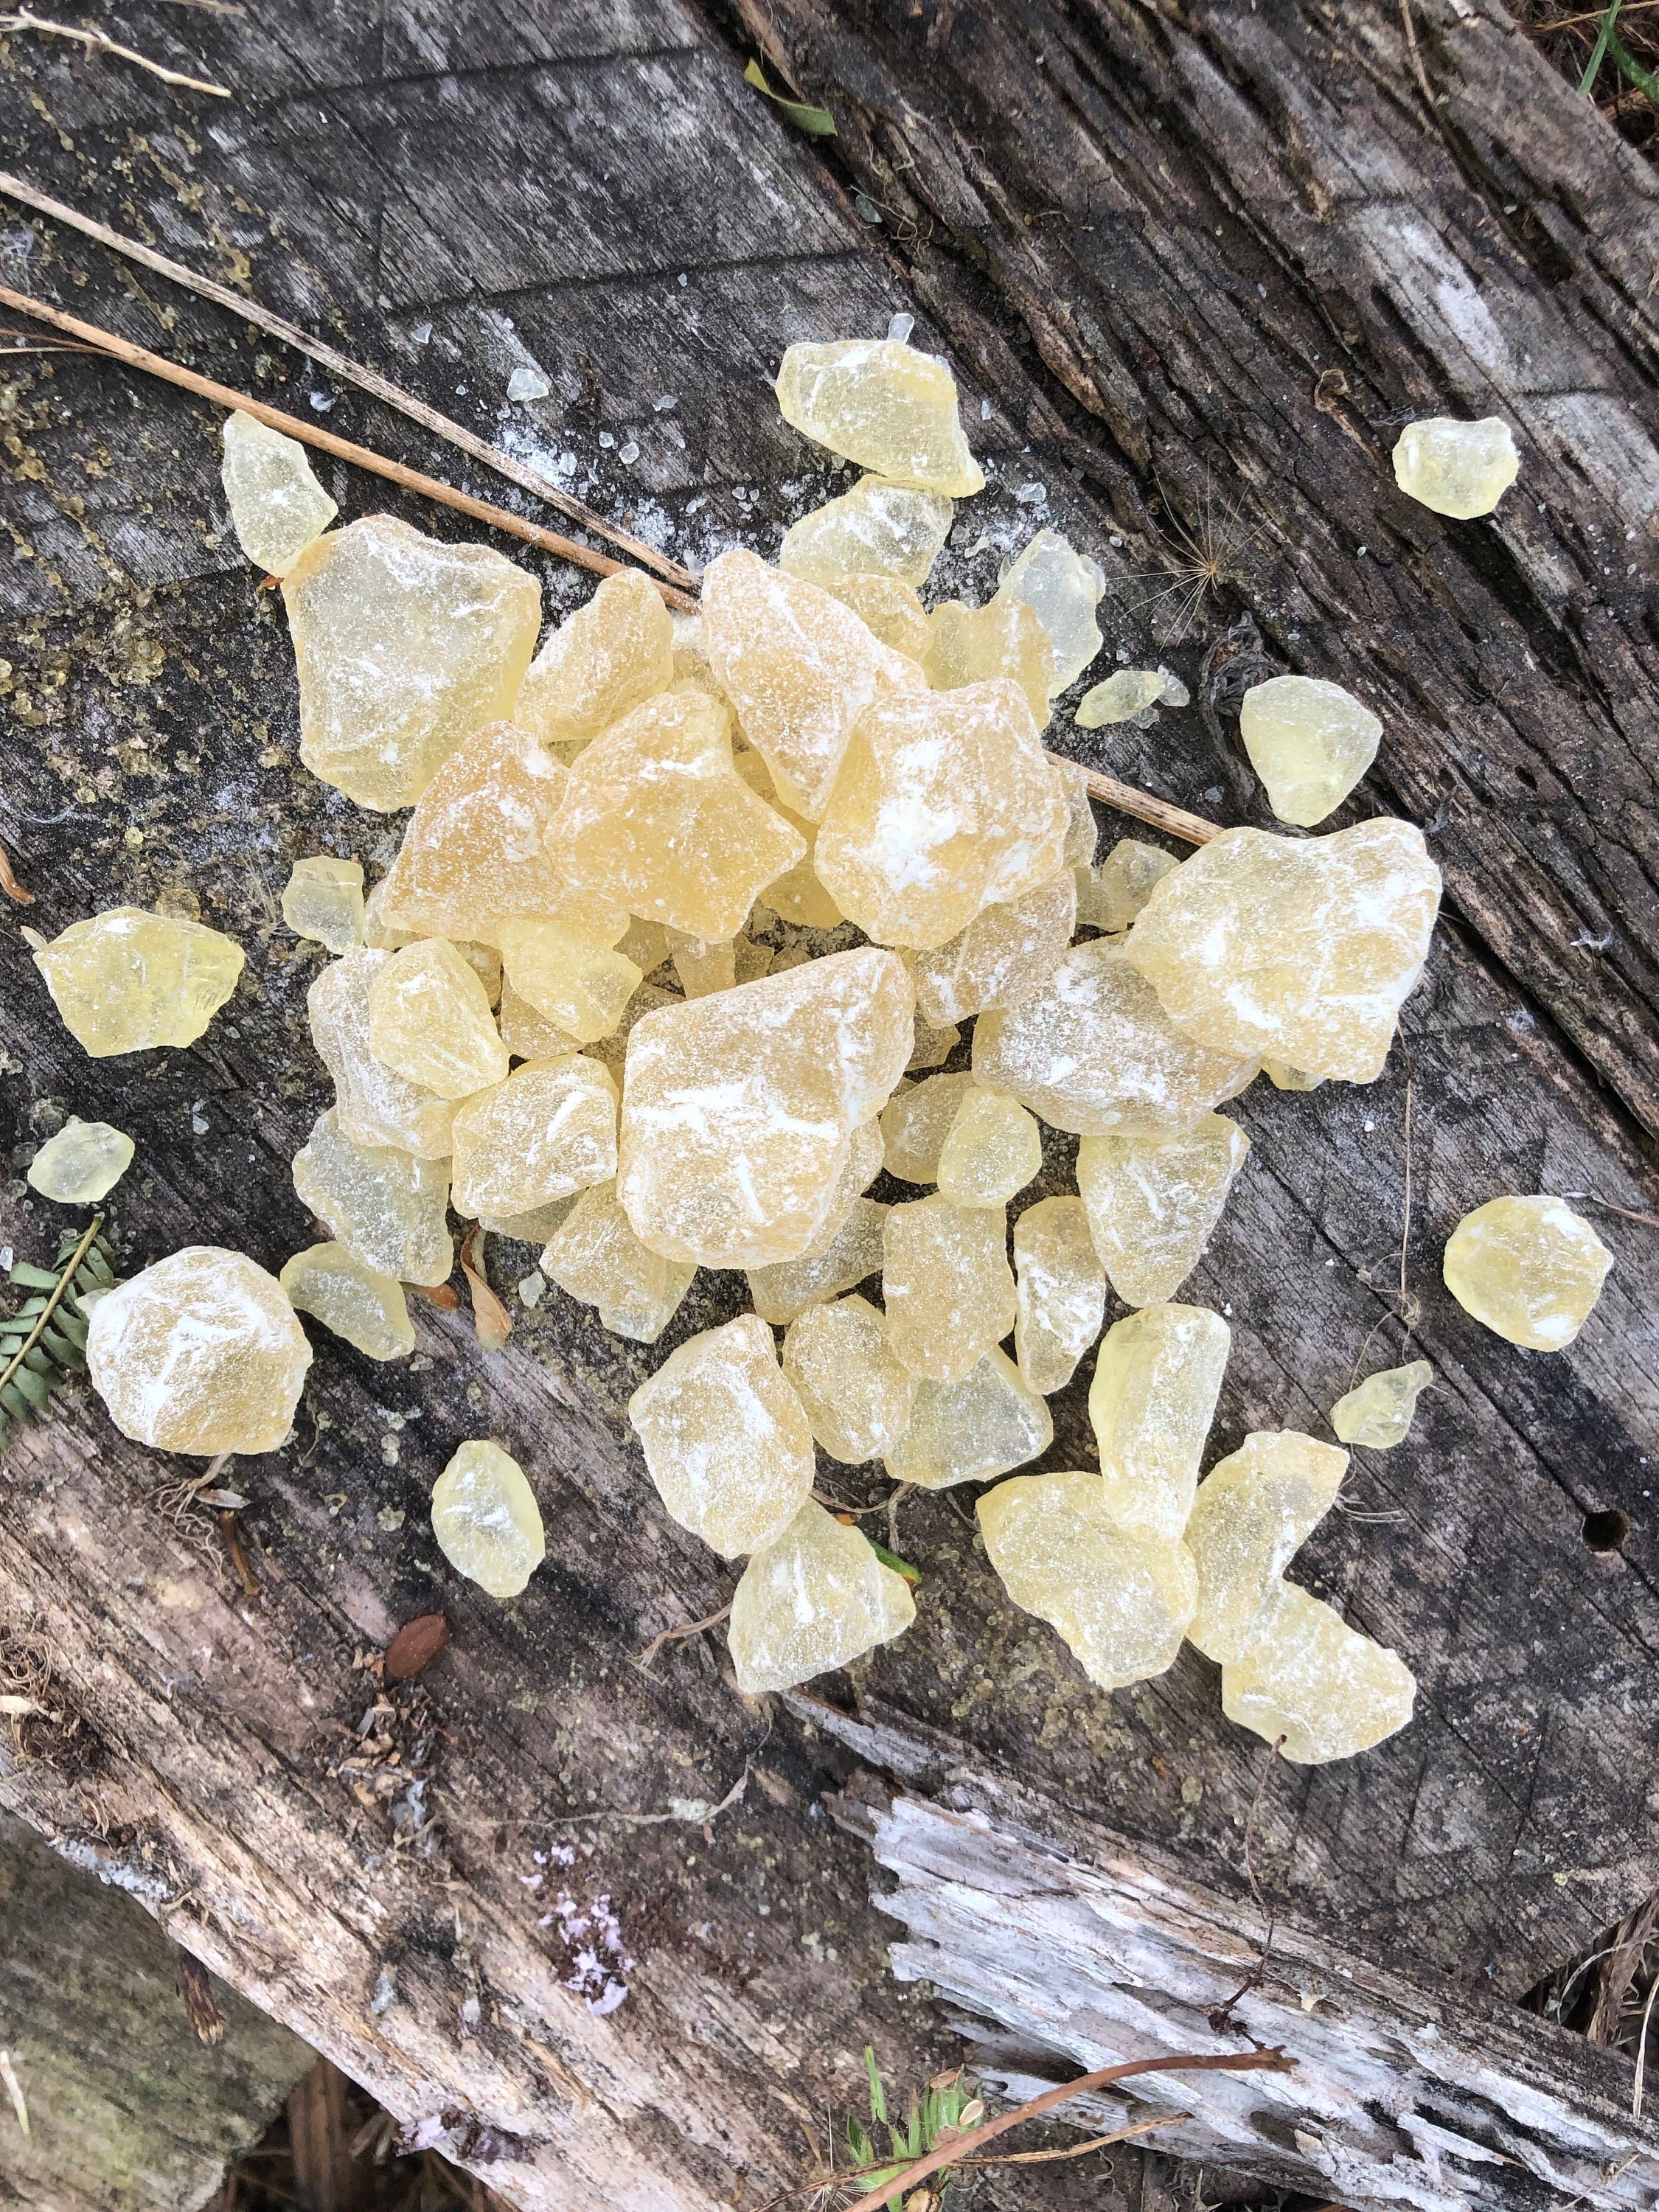 Pine Rosin - Tree Resin for Making Beeswax Food Wraps, Food Grade Pine Resin  Natural Hand Grip Enhancer Gum Nugget Rock Form - Buy Online - 169006379